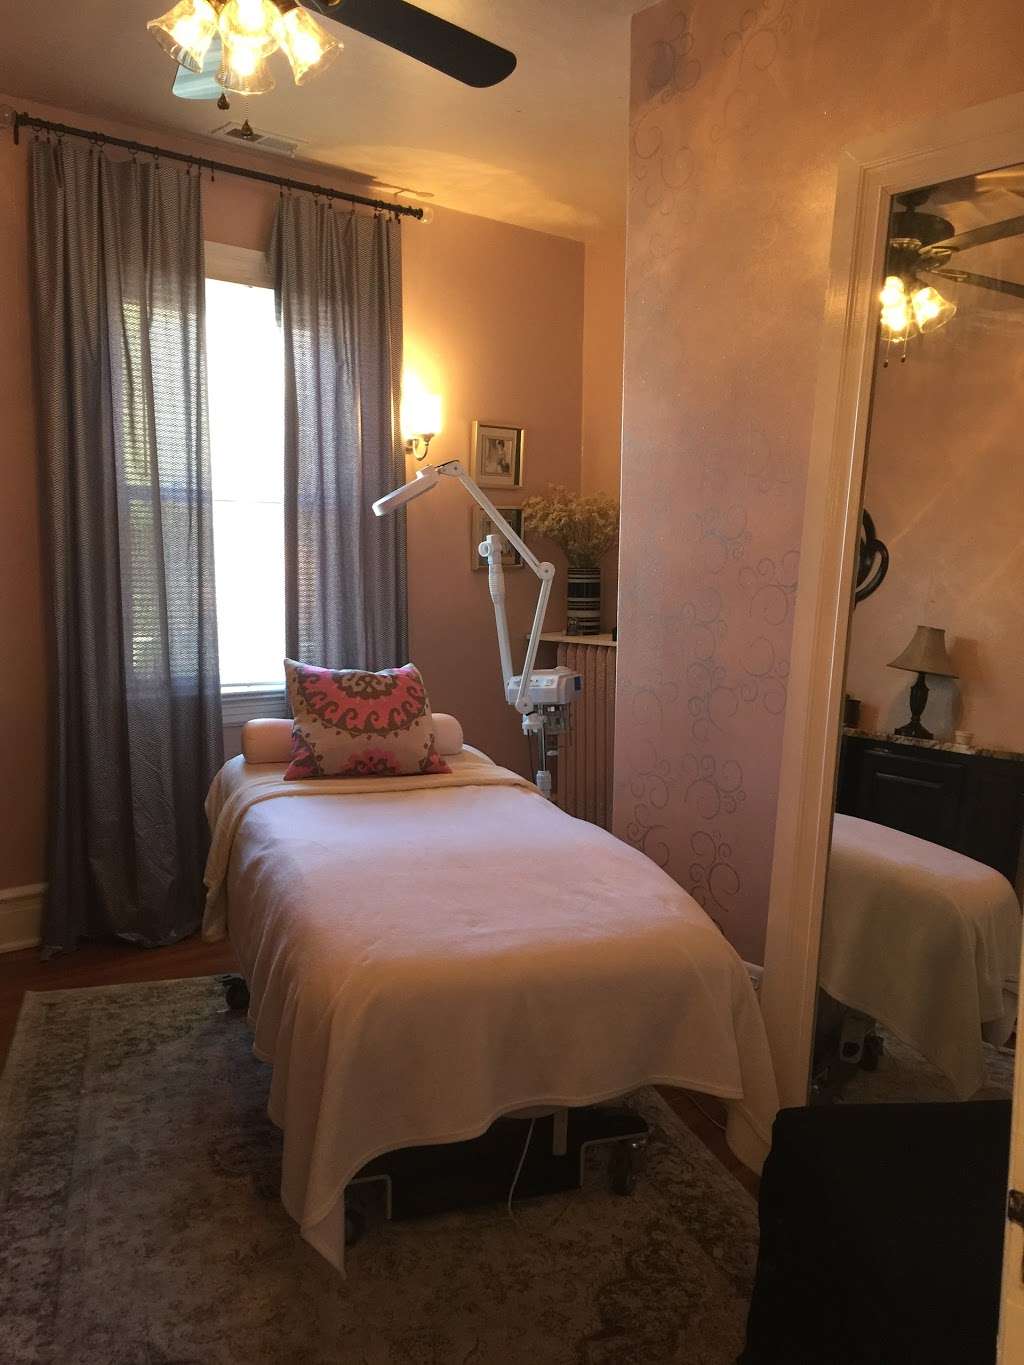 The Spa on West Main | 143 W Main St, Westminster, MD 21157 | Phone: (410) 871-0023